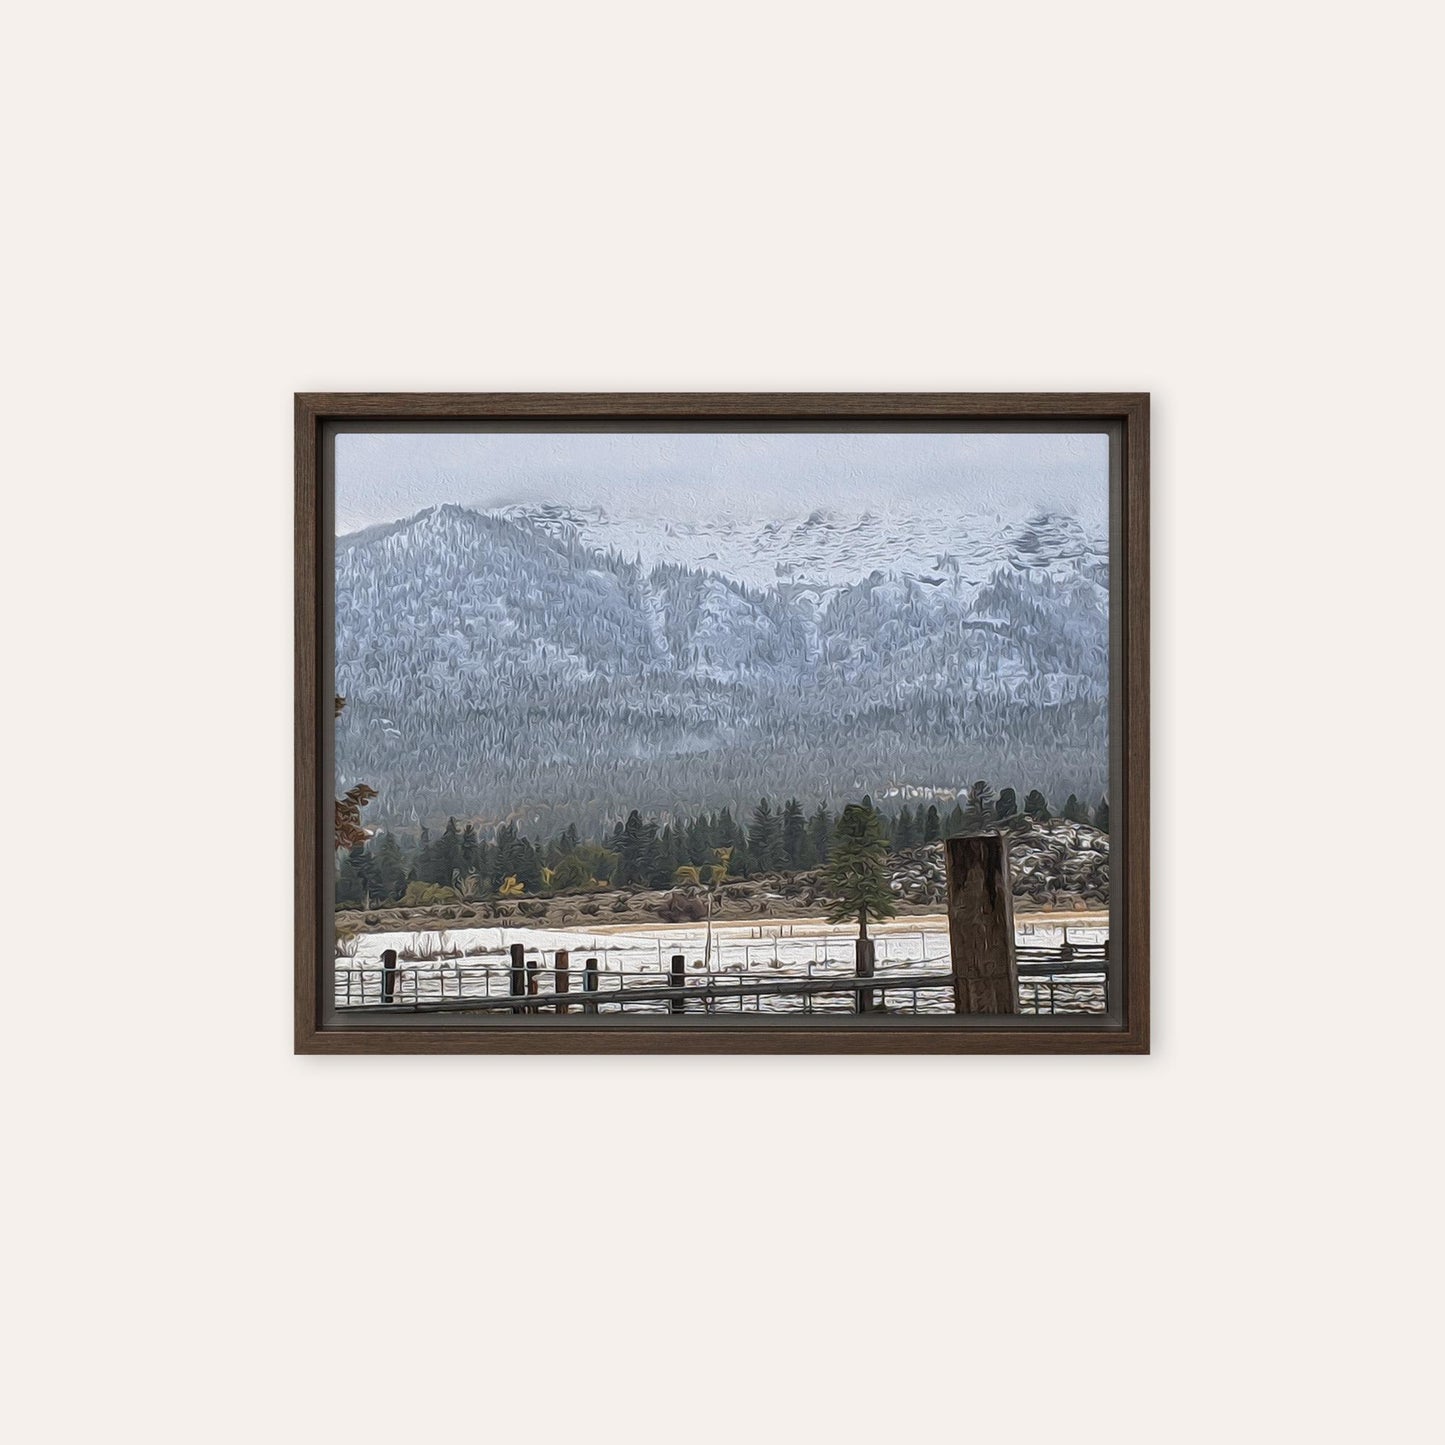 Out at The Ranch Framed Print